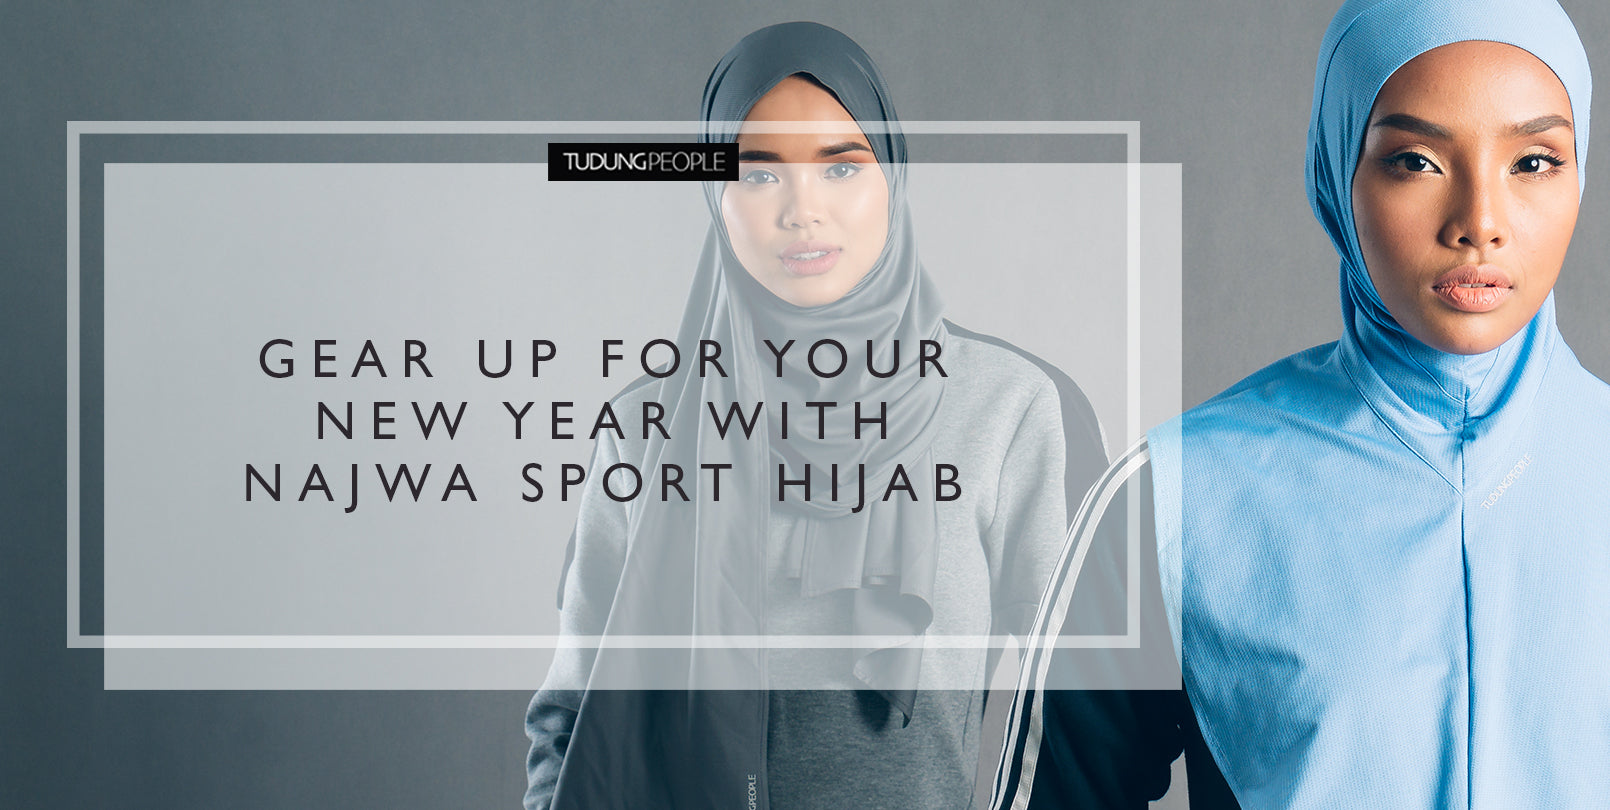 Gear up for a healthy new year with Najwa Sport